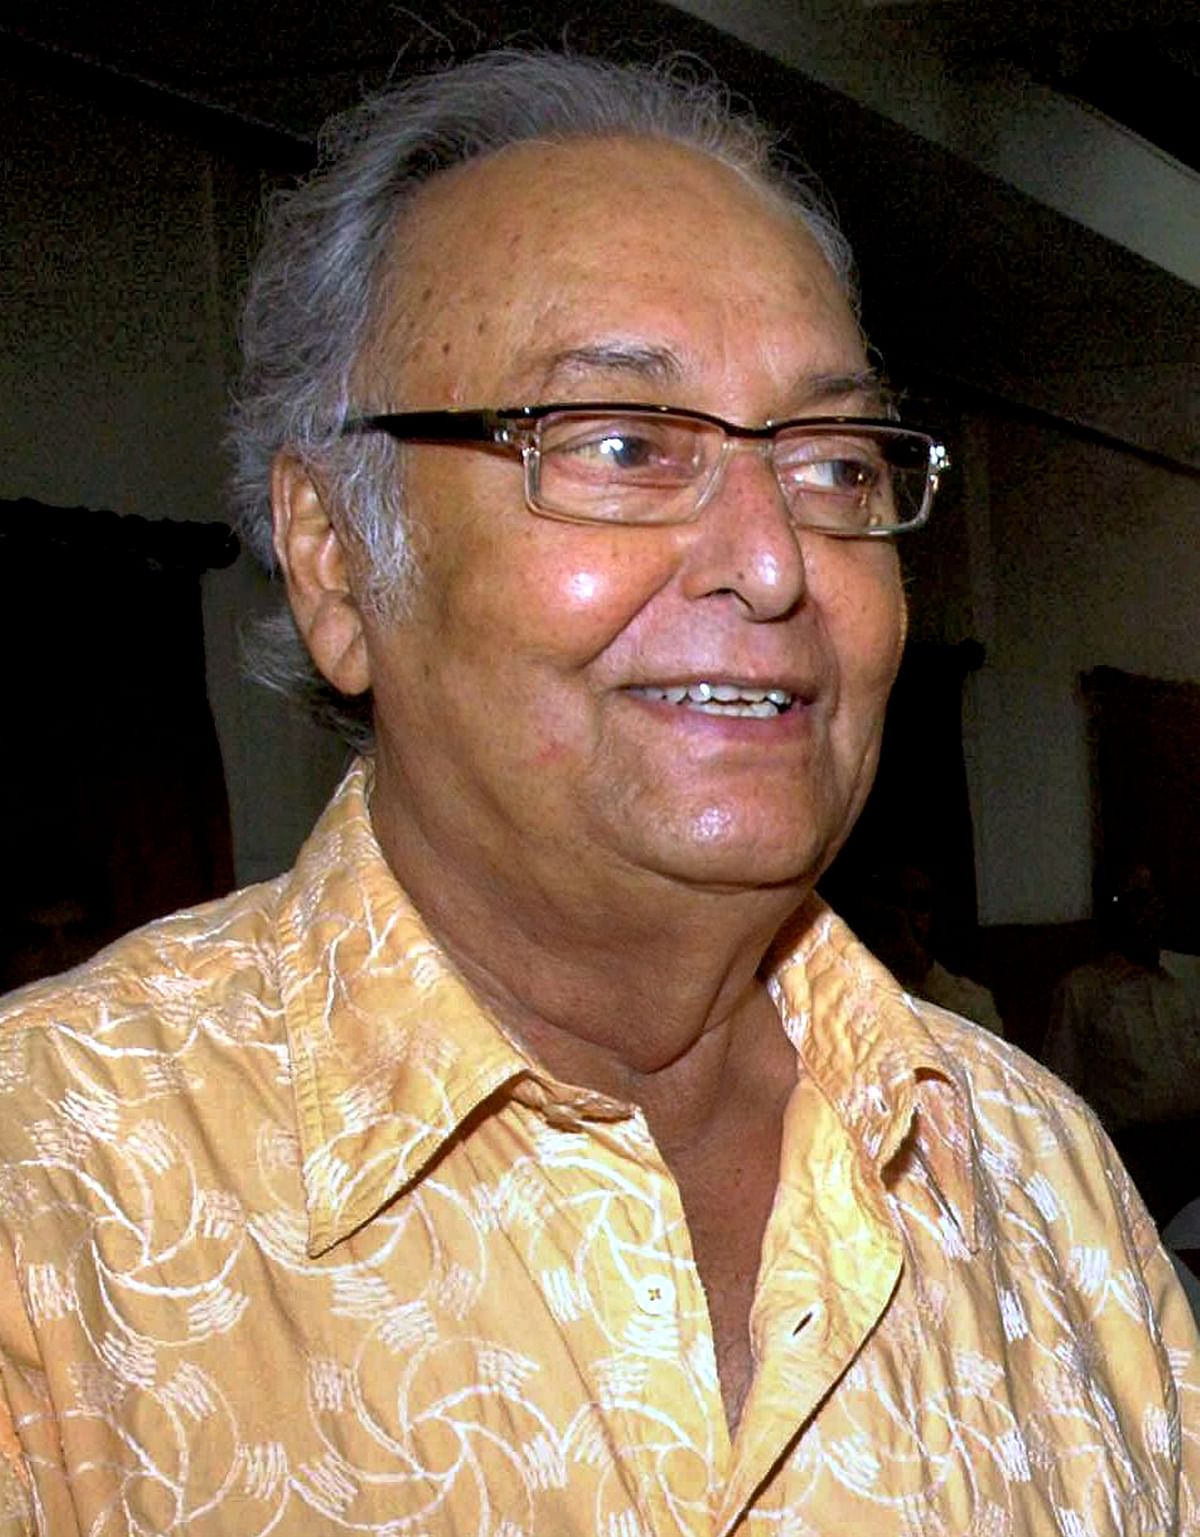 Soumitra Chatterjee | On November 15, the actor who transcended the boundaries of language, state and country to take Indian cinema to the world, died from post-Covid-19 complications in a Kolkata hospital. The 85-year-old, also known as Satyajit Ray’s alter ego, was one of India’s most well-known actors, feted for his performance in classics such as “Charulata” and “Ghaire Baire”. But he was more than just a Bengali star and more than just about Ray, continuing to write, critique and act till the end. His death led to an outpouring of grief in his hometown Kolkata with thousands lining the streets for a last glimpse as the cortege wounds its way through the city. Credit: PTI Photo